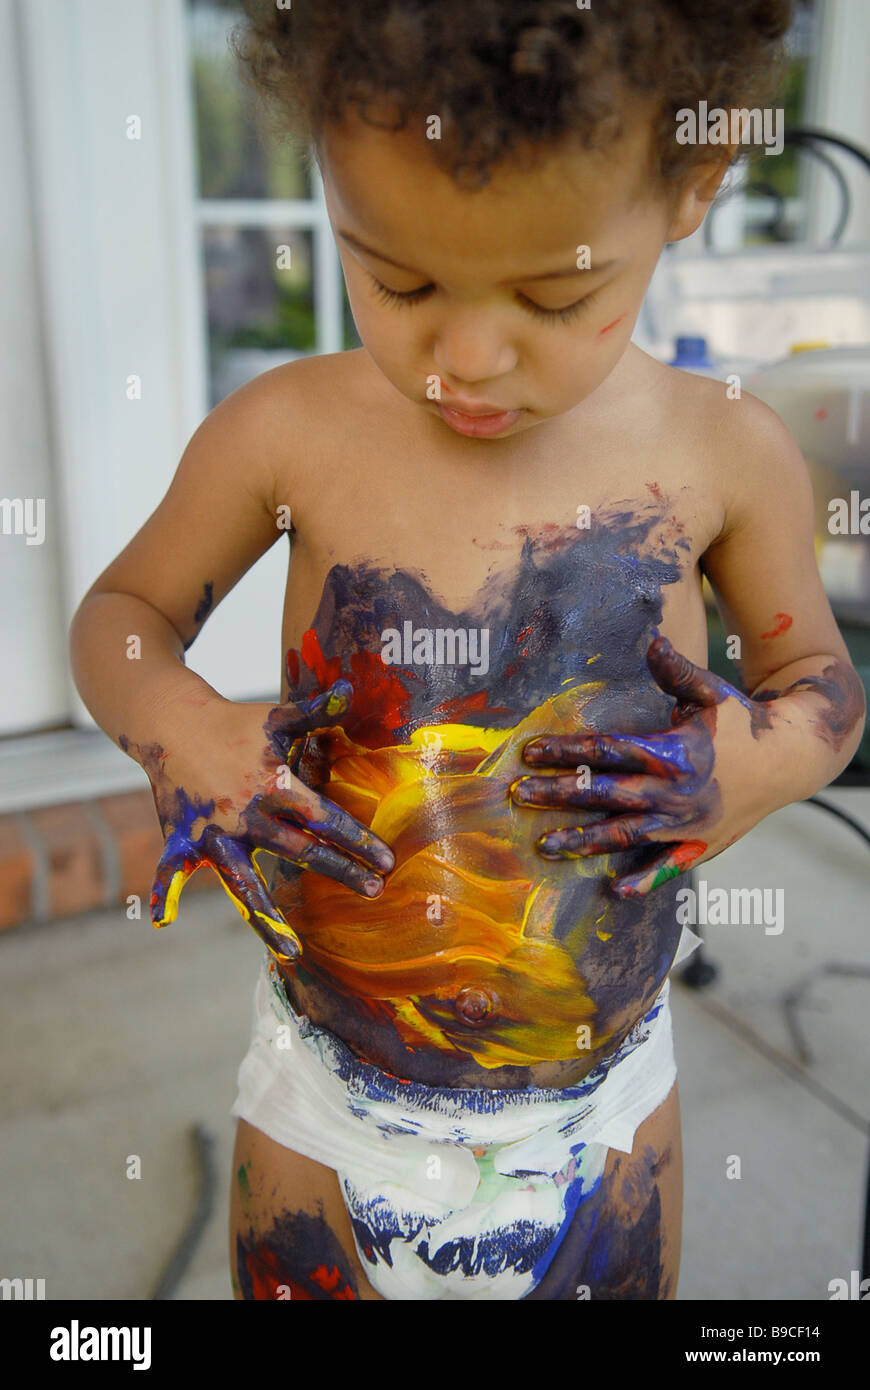 An African American biracial child paints her body with red green blue and yellow primary colors as she plays outside Stock Photo